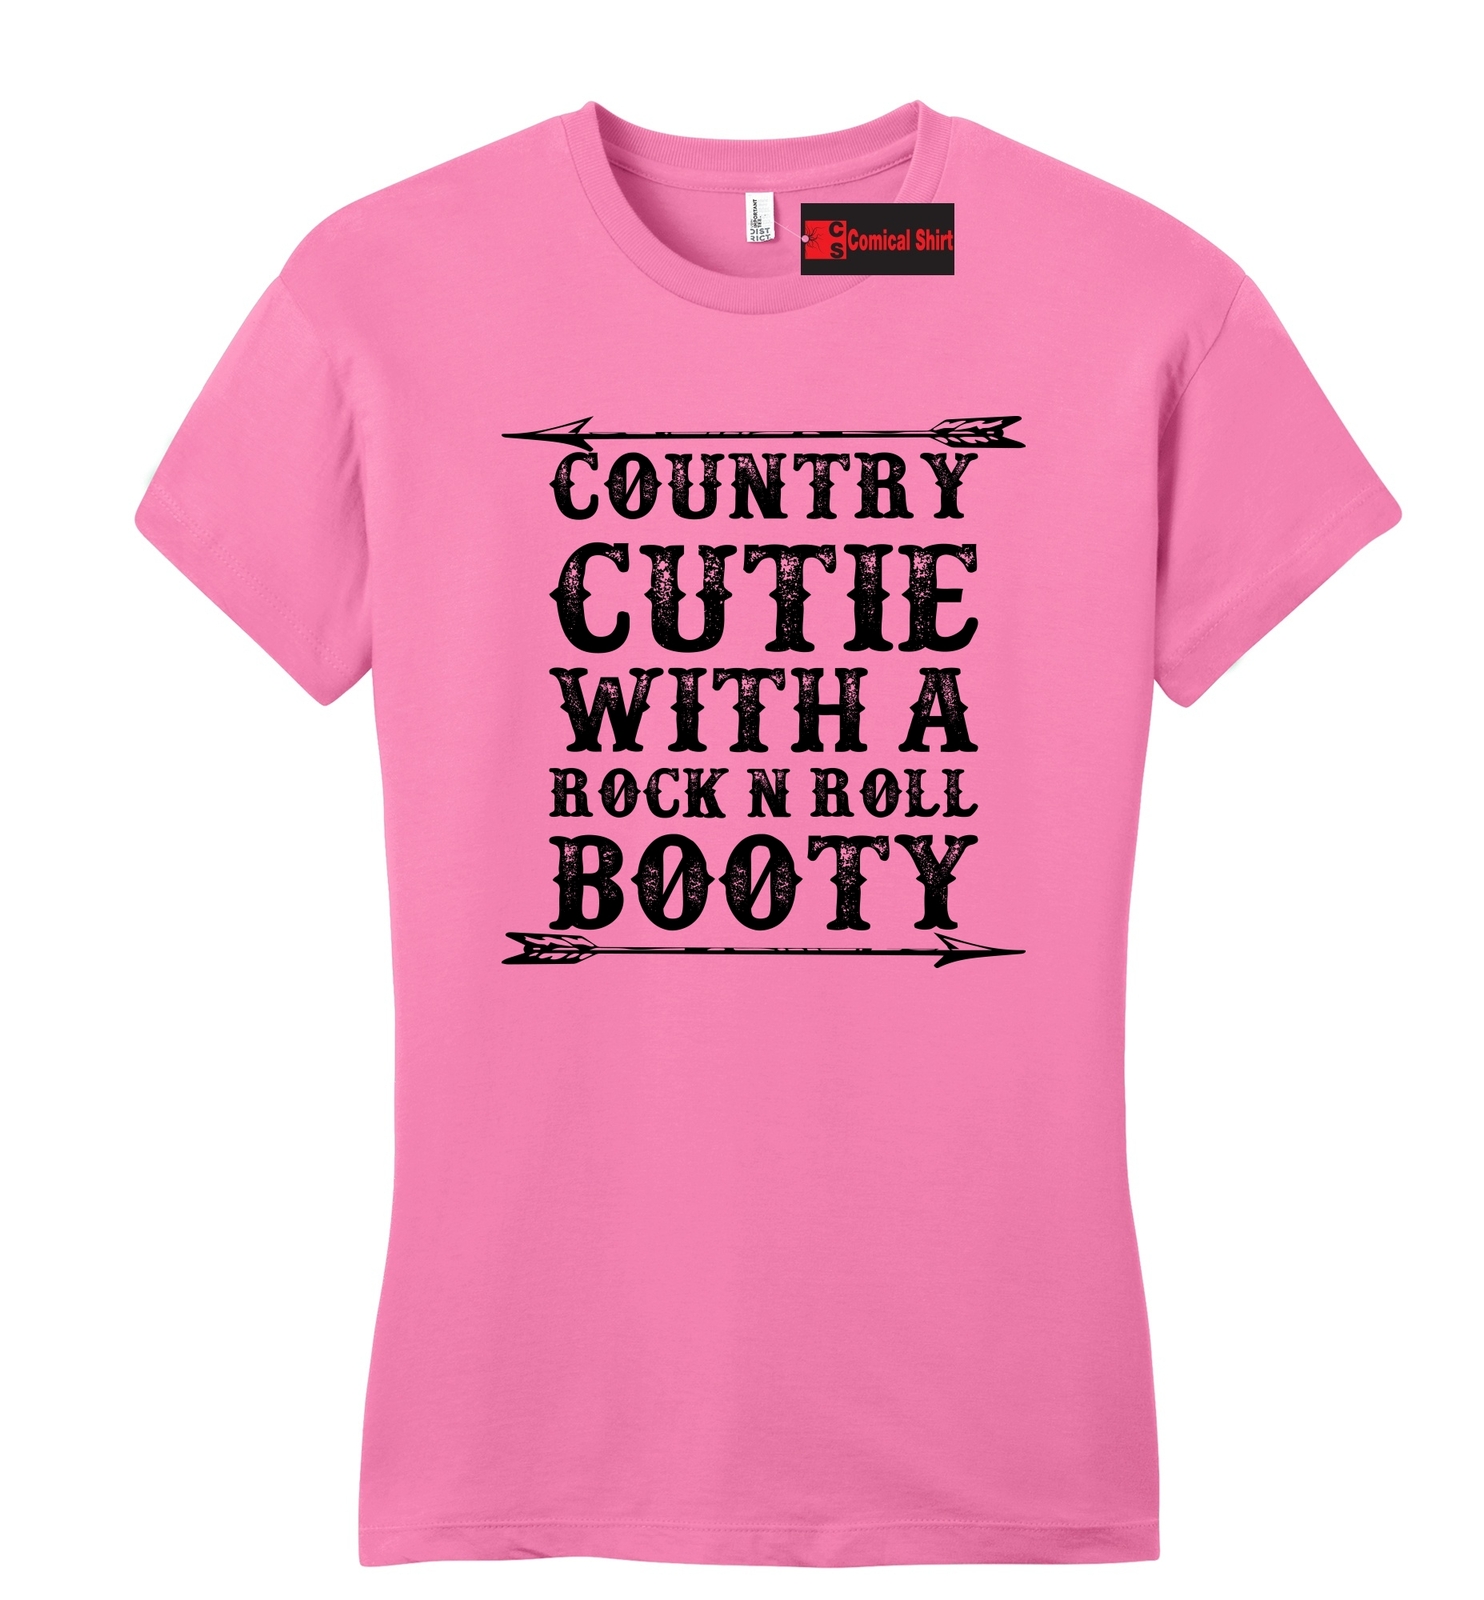 Country Cutie With Rock N Roll Booty Cute Graphic Tee Western Ladies ...